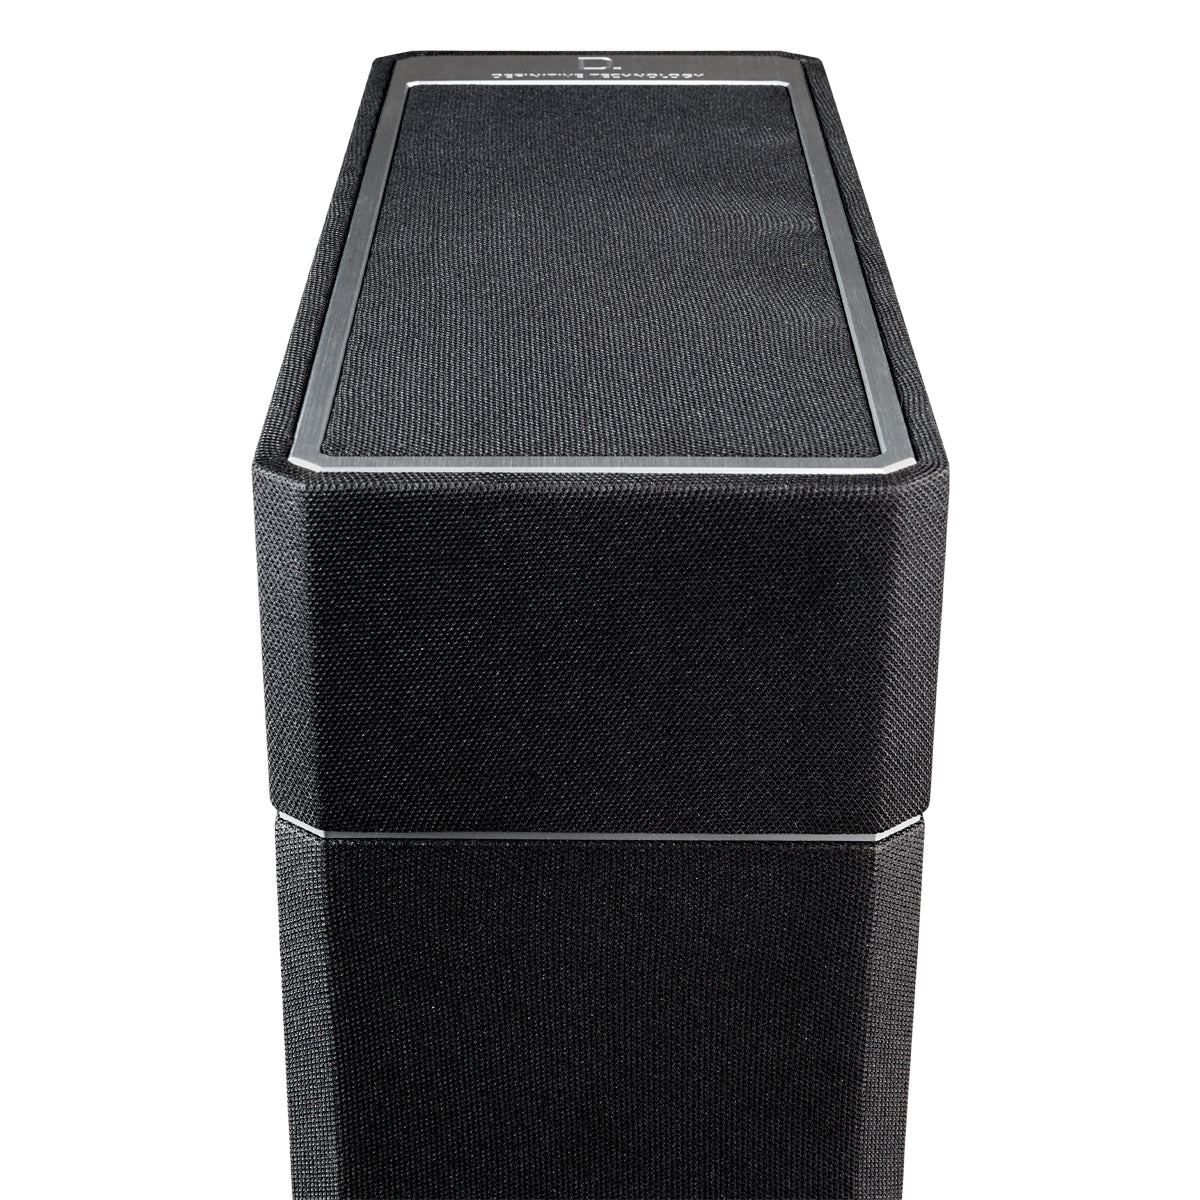 Definitive Technology BP9020 Bipolar Tower Speakers with Active Subwoofer - The Audio Experts